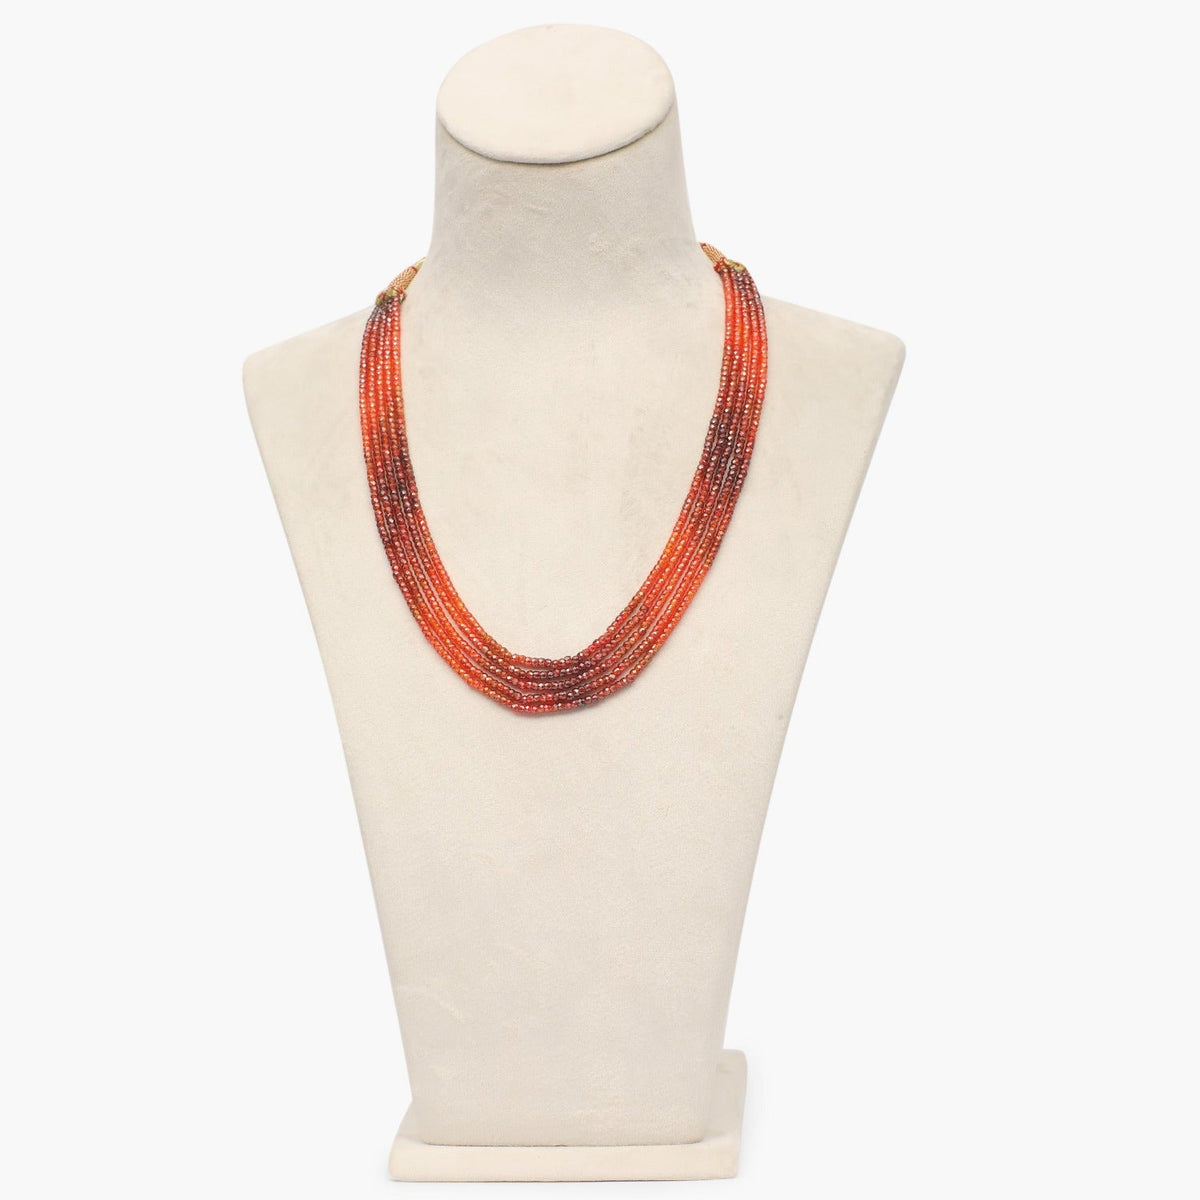 Dark Orange Shaded Cubic Zirconia Faceted Beads Necklace